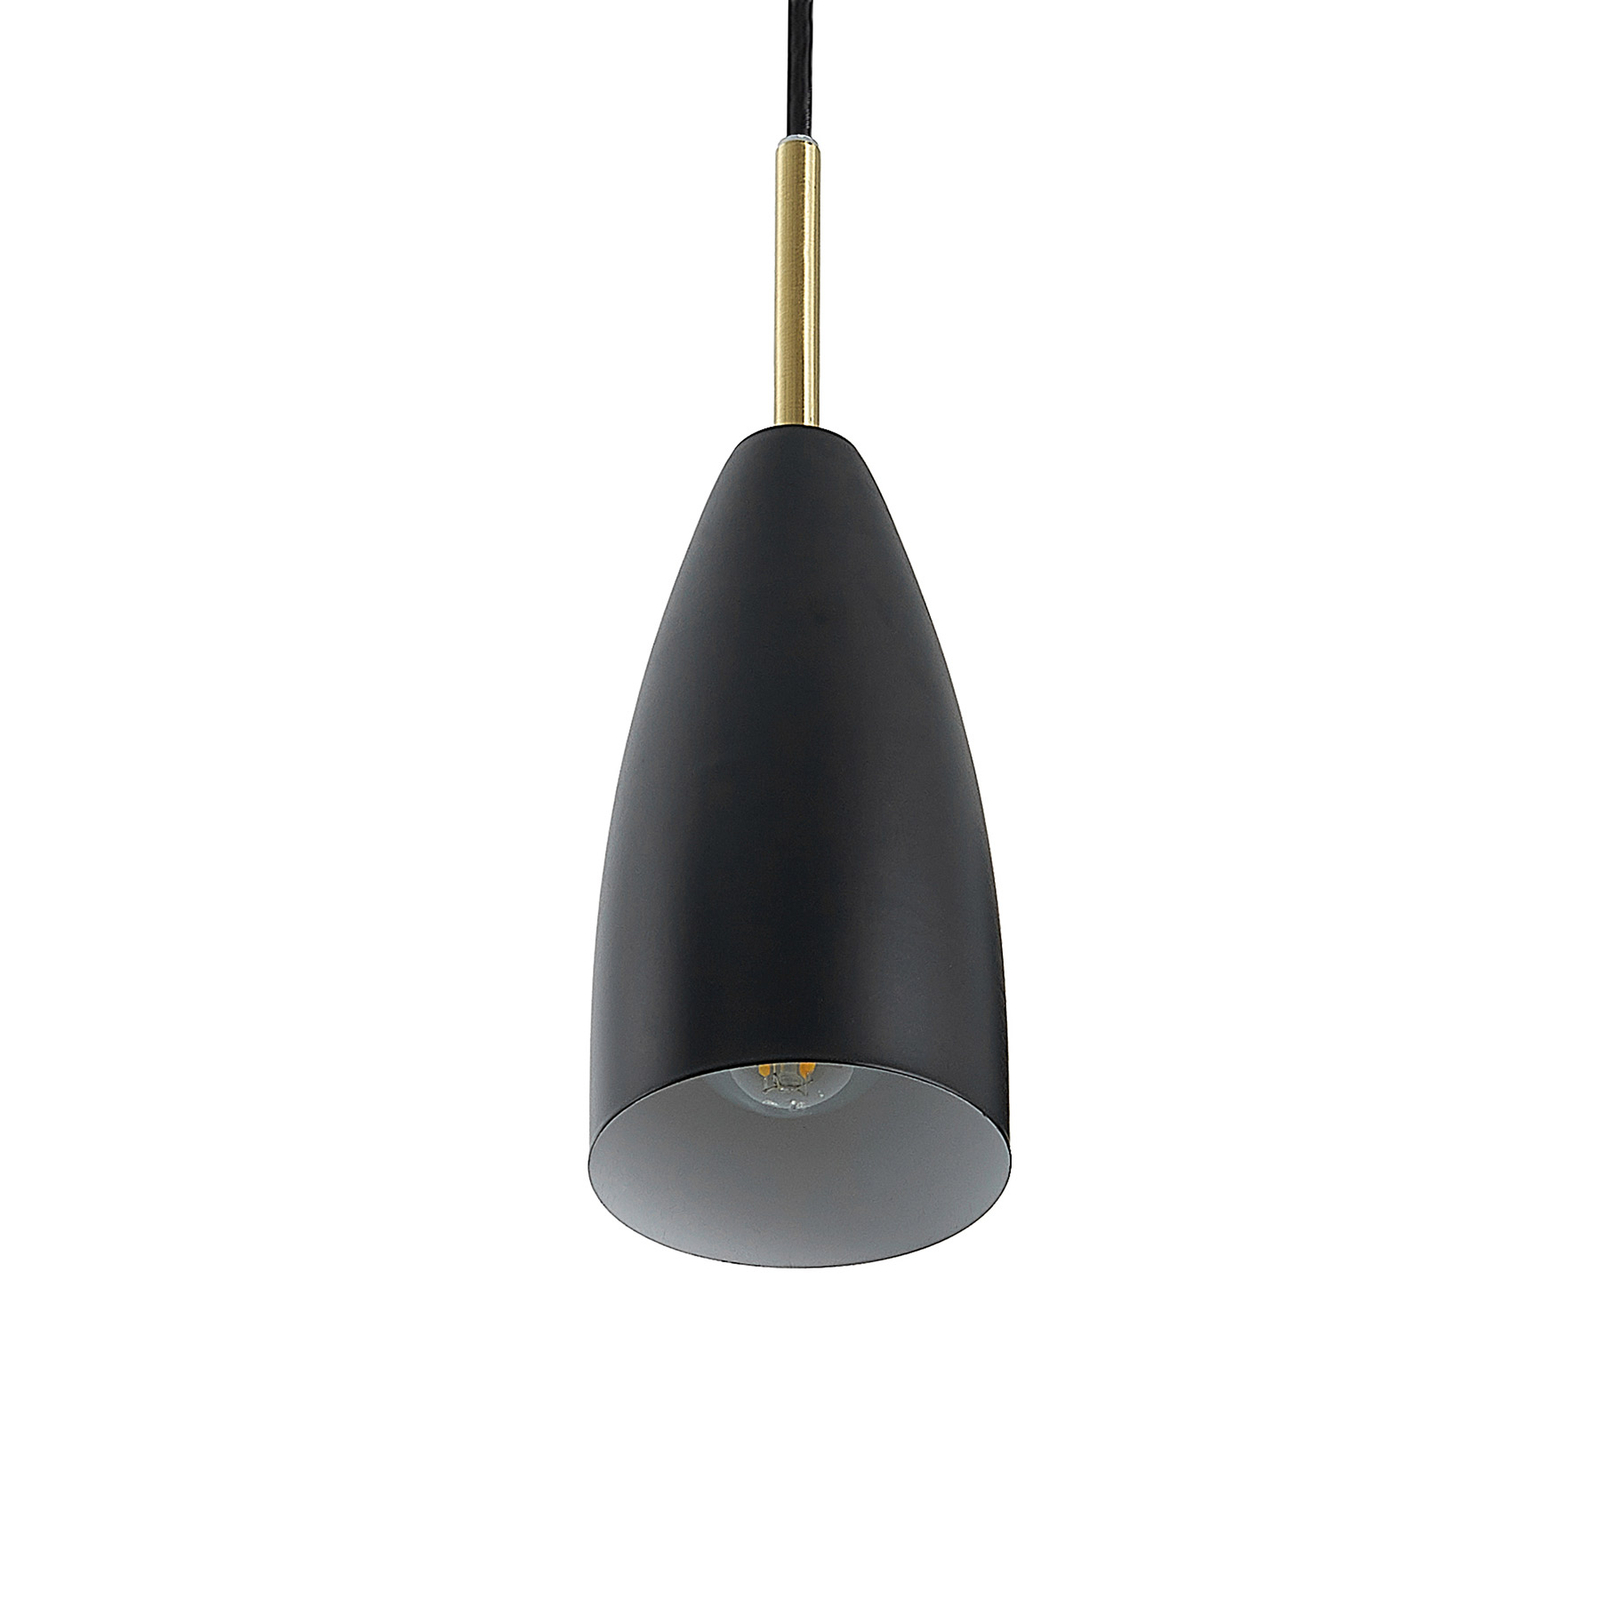 Lindby Caylee hanglamp, 6-lamps